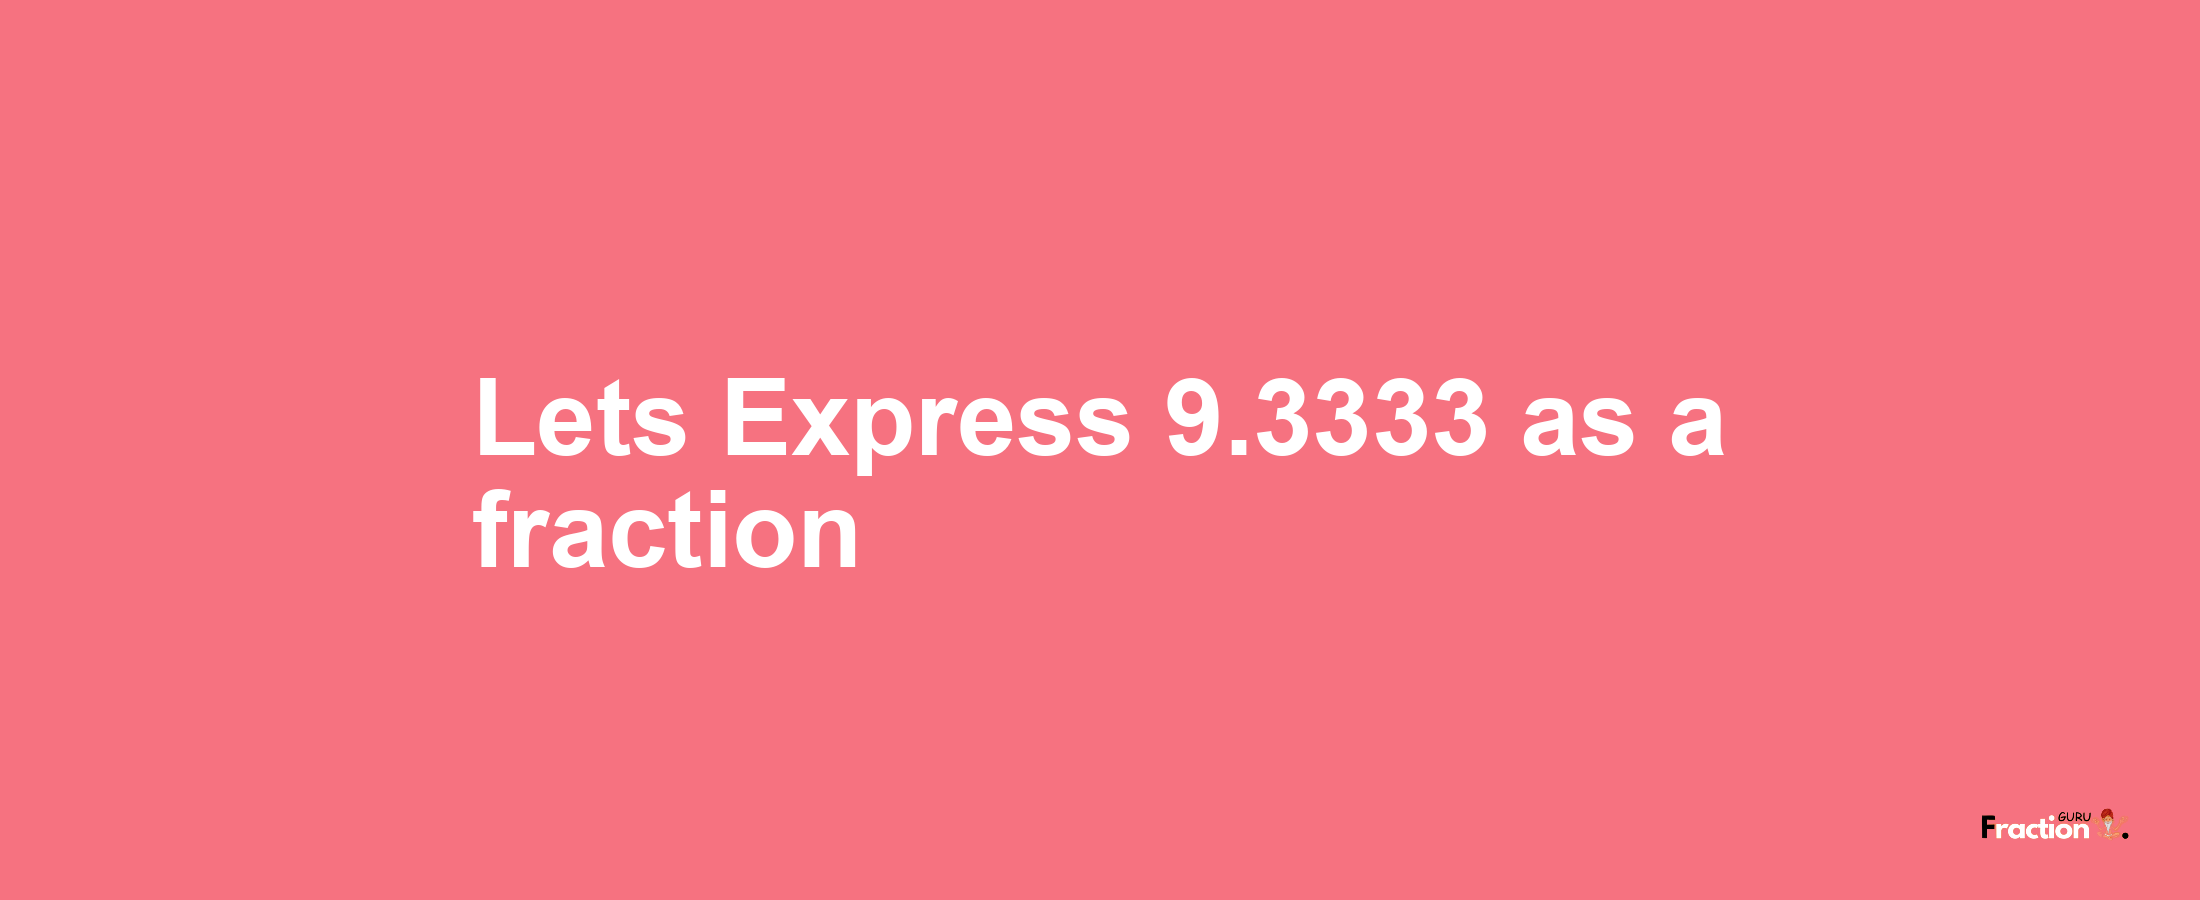 Lets Express 9.3333 as afraction